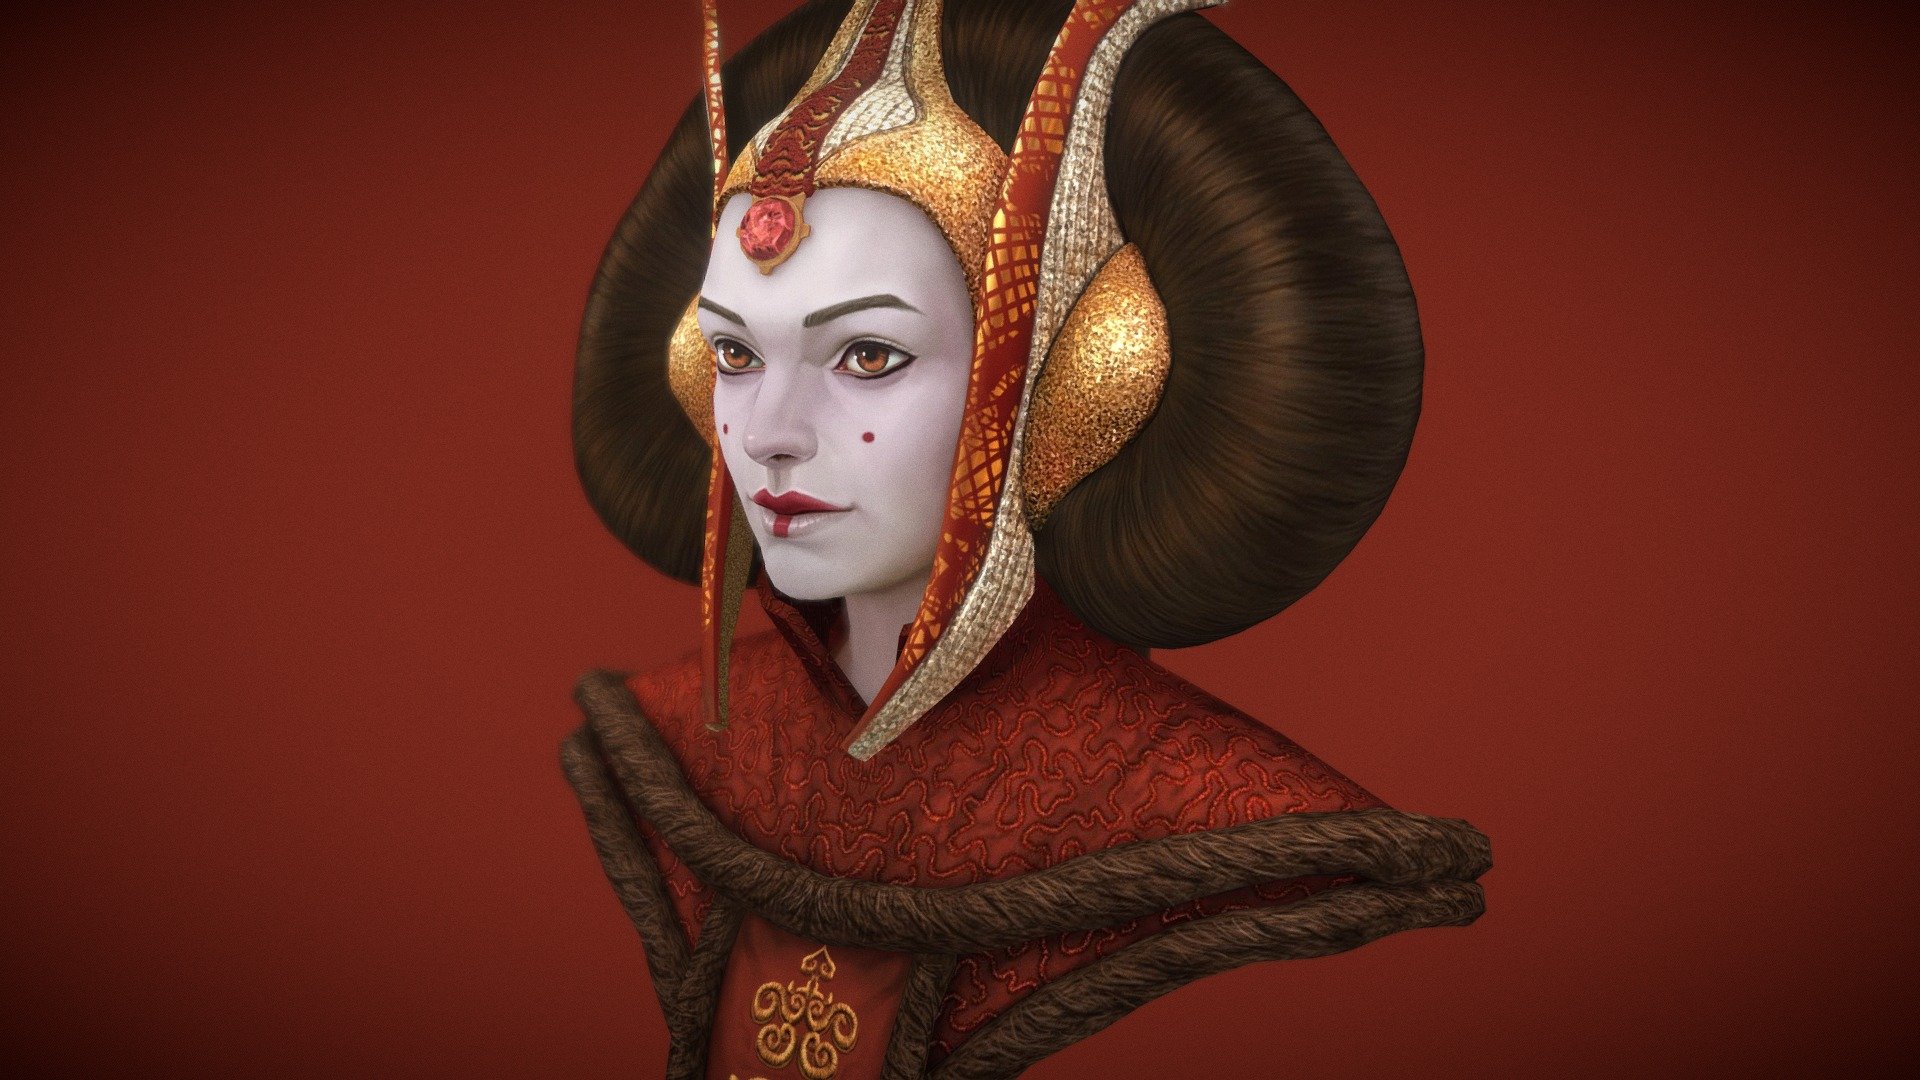 FanArt: A Handpainted Low Poly of Natalie Portman as Queen Amidala fron Star Wars Episode I. 
Thank you for your comments and likes.
Also you can visit my Artstation gallery of this and other models.
https://www.artstation.com/artwork/WKQQmv - Queen Amidala - 3D model by luisservin89 3d model